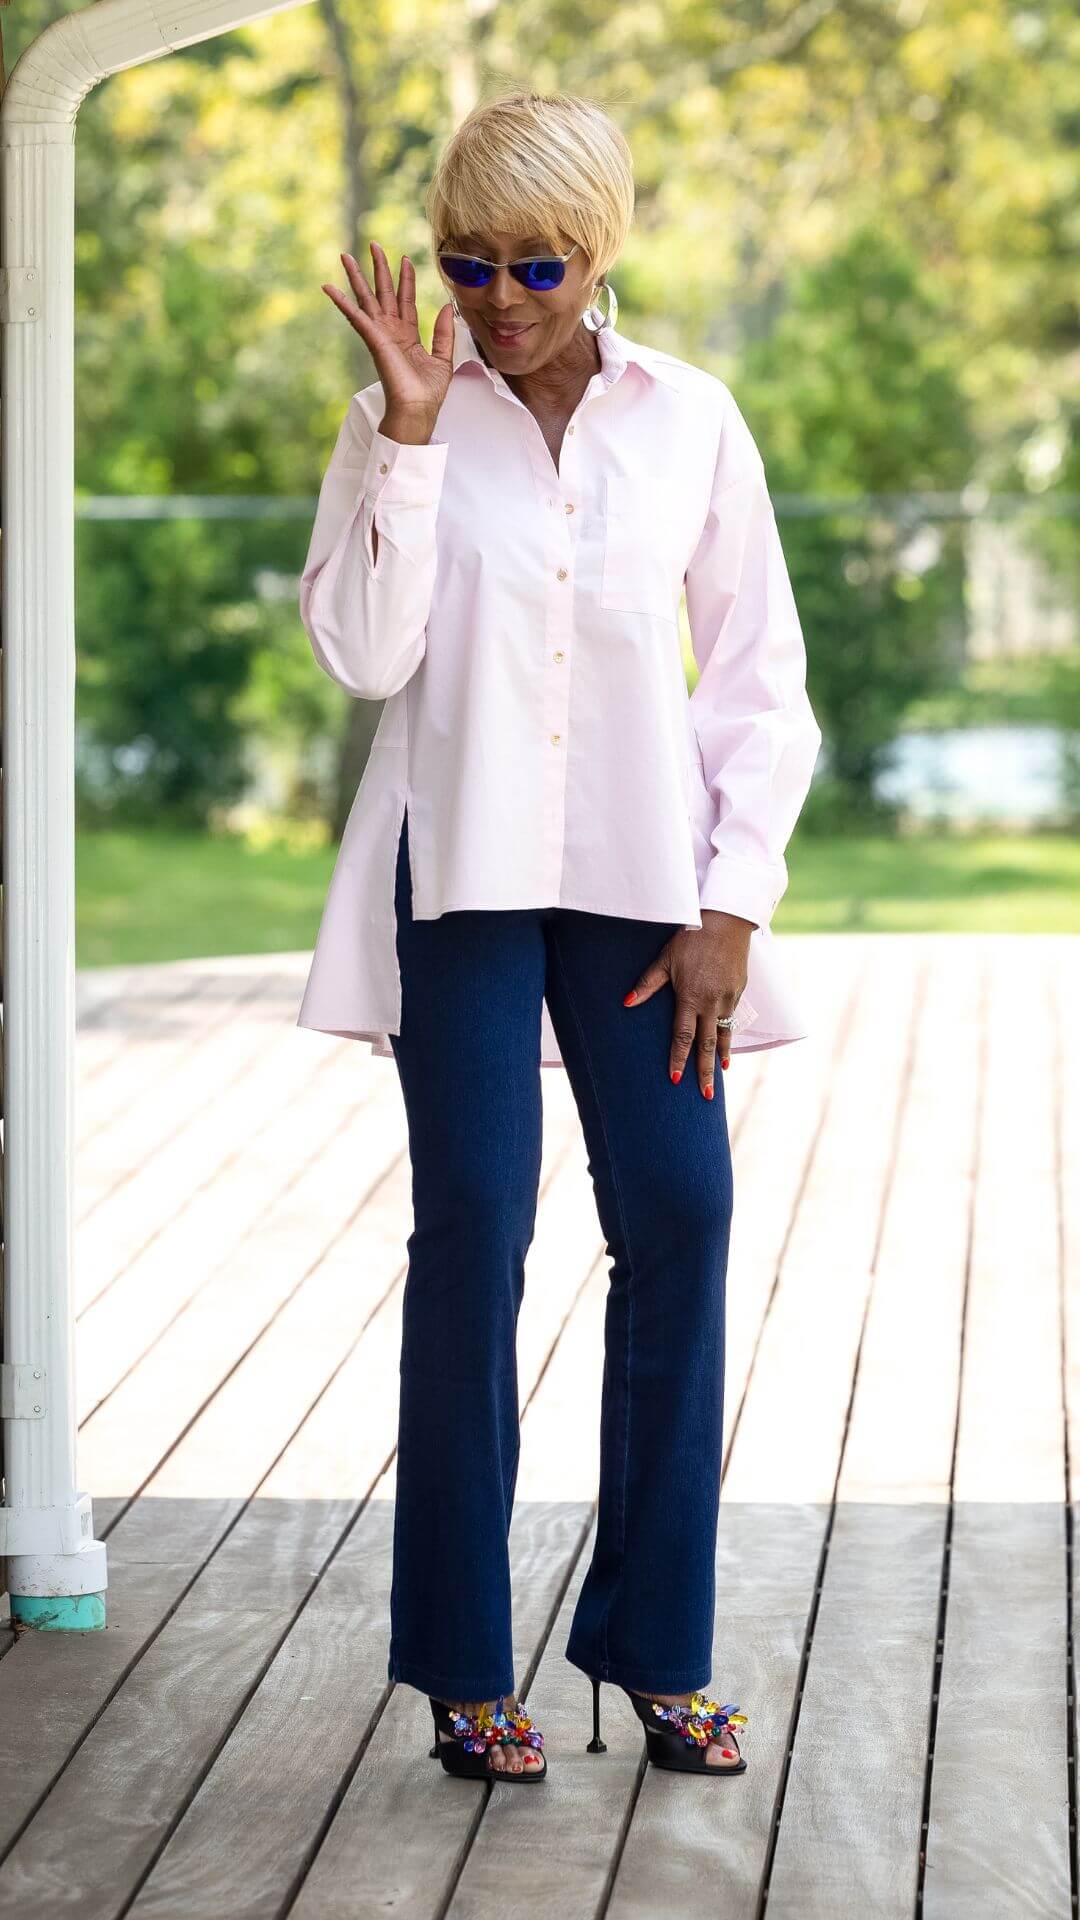 Women with Control® Elite Prime Stretch Denim Flare Pant in Ink Indigo paired with the Attitudes By Renée® Flyaway Button Front Shirt in Pink Peony